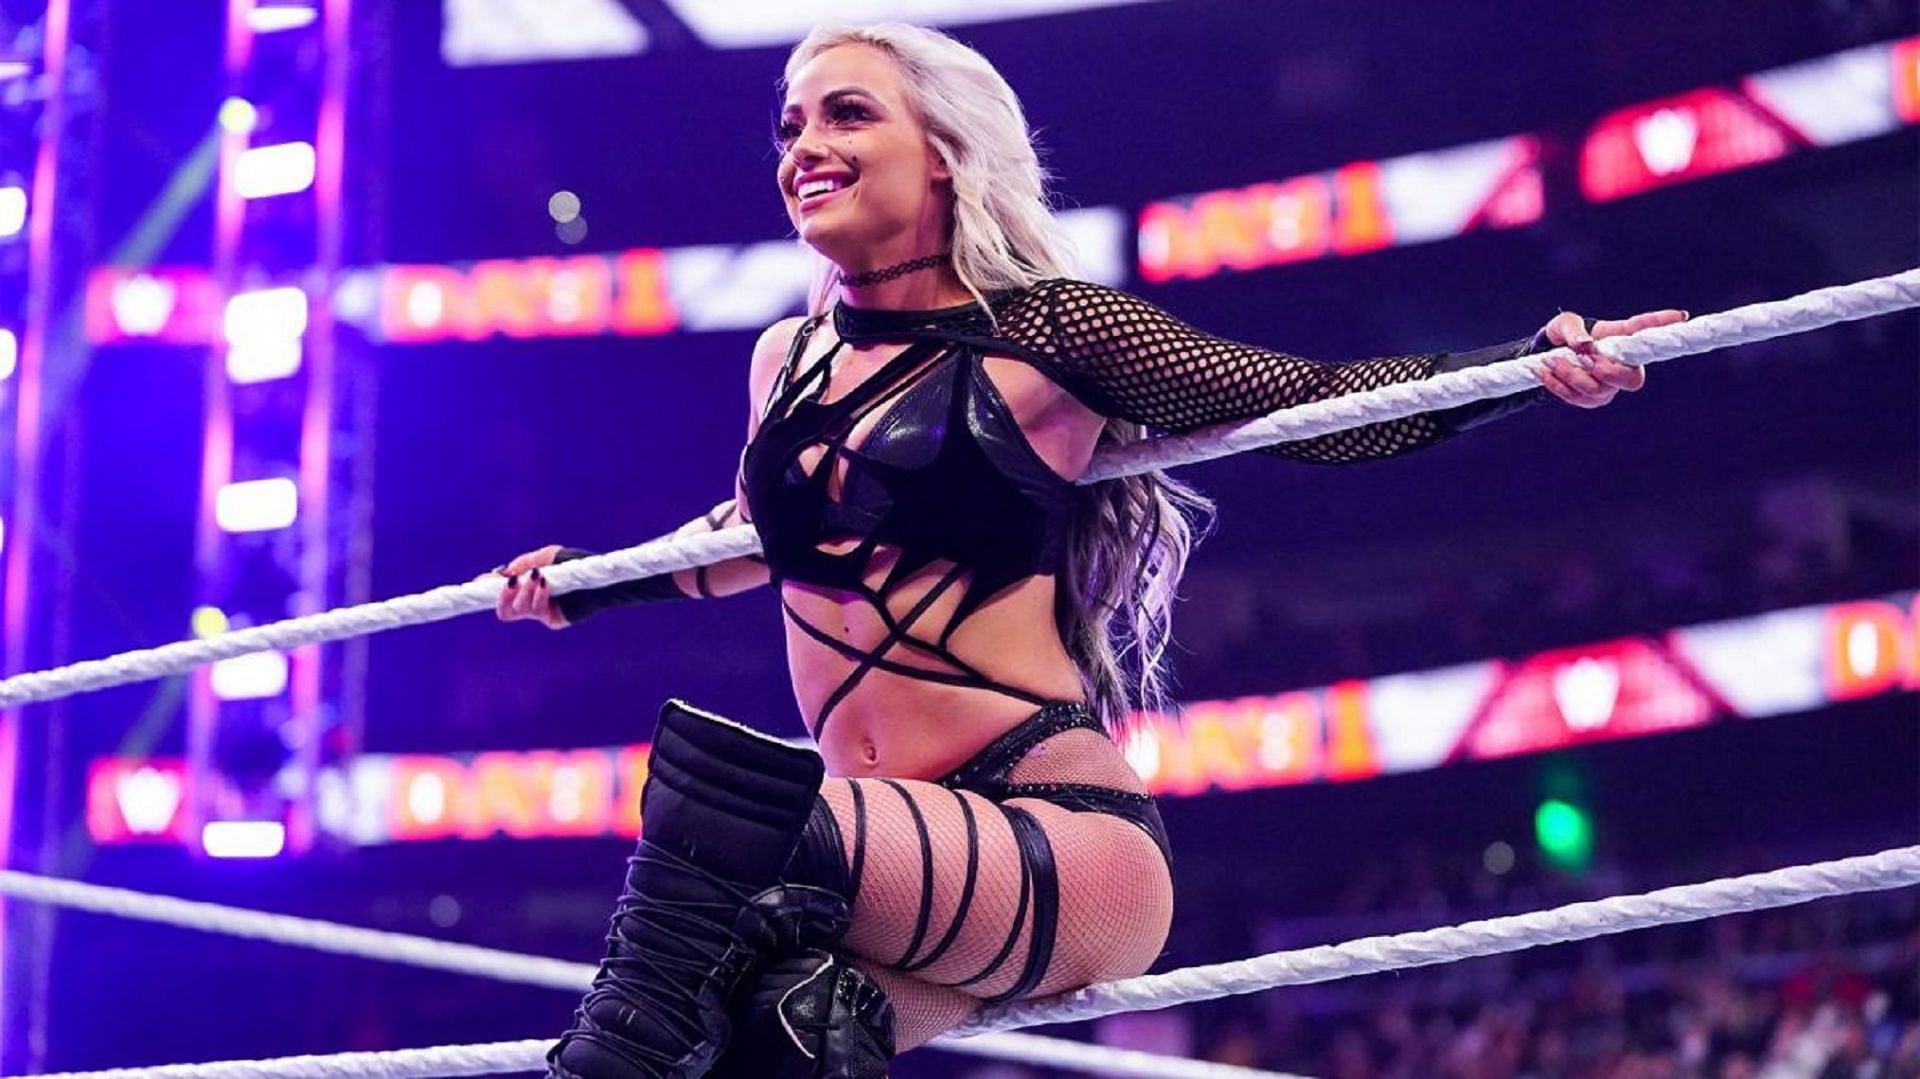 "I'm very honored" - WWE legend approves of Liv Morgan poten...